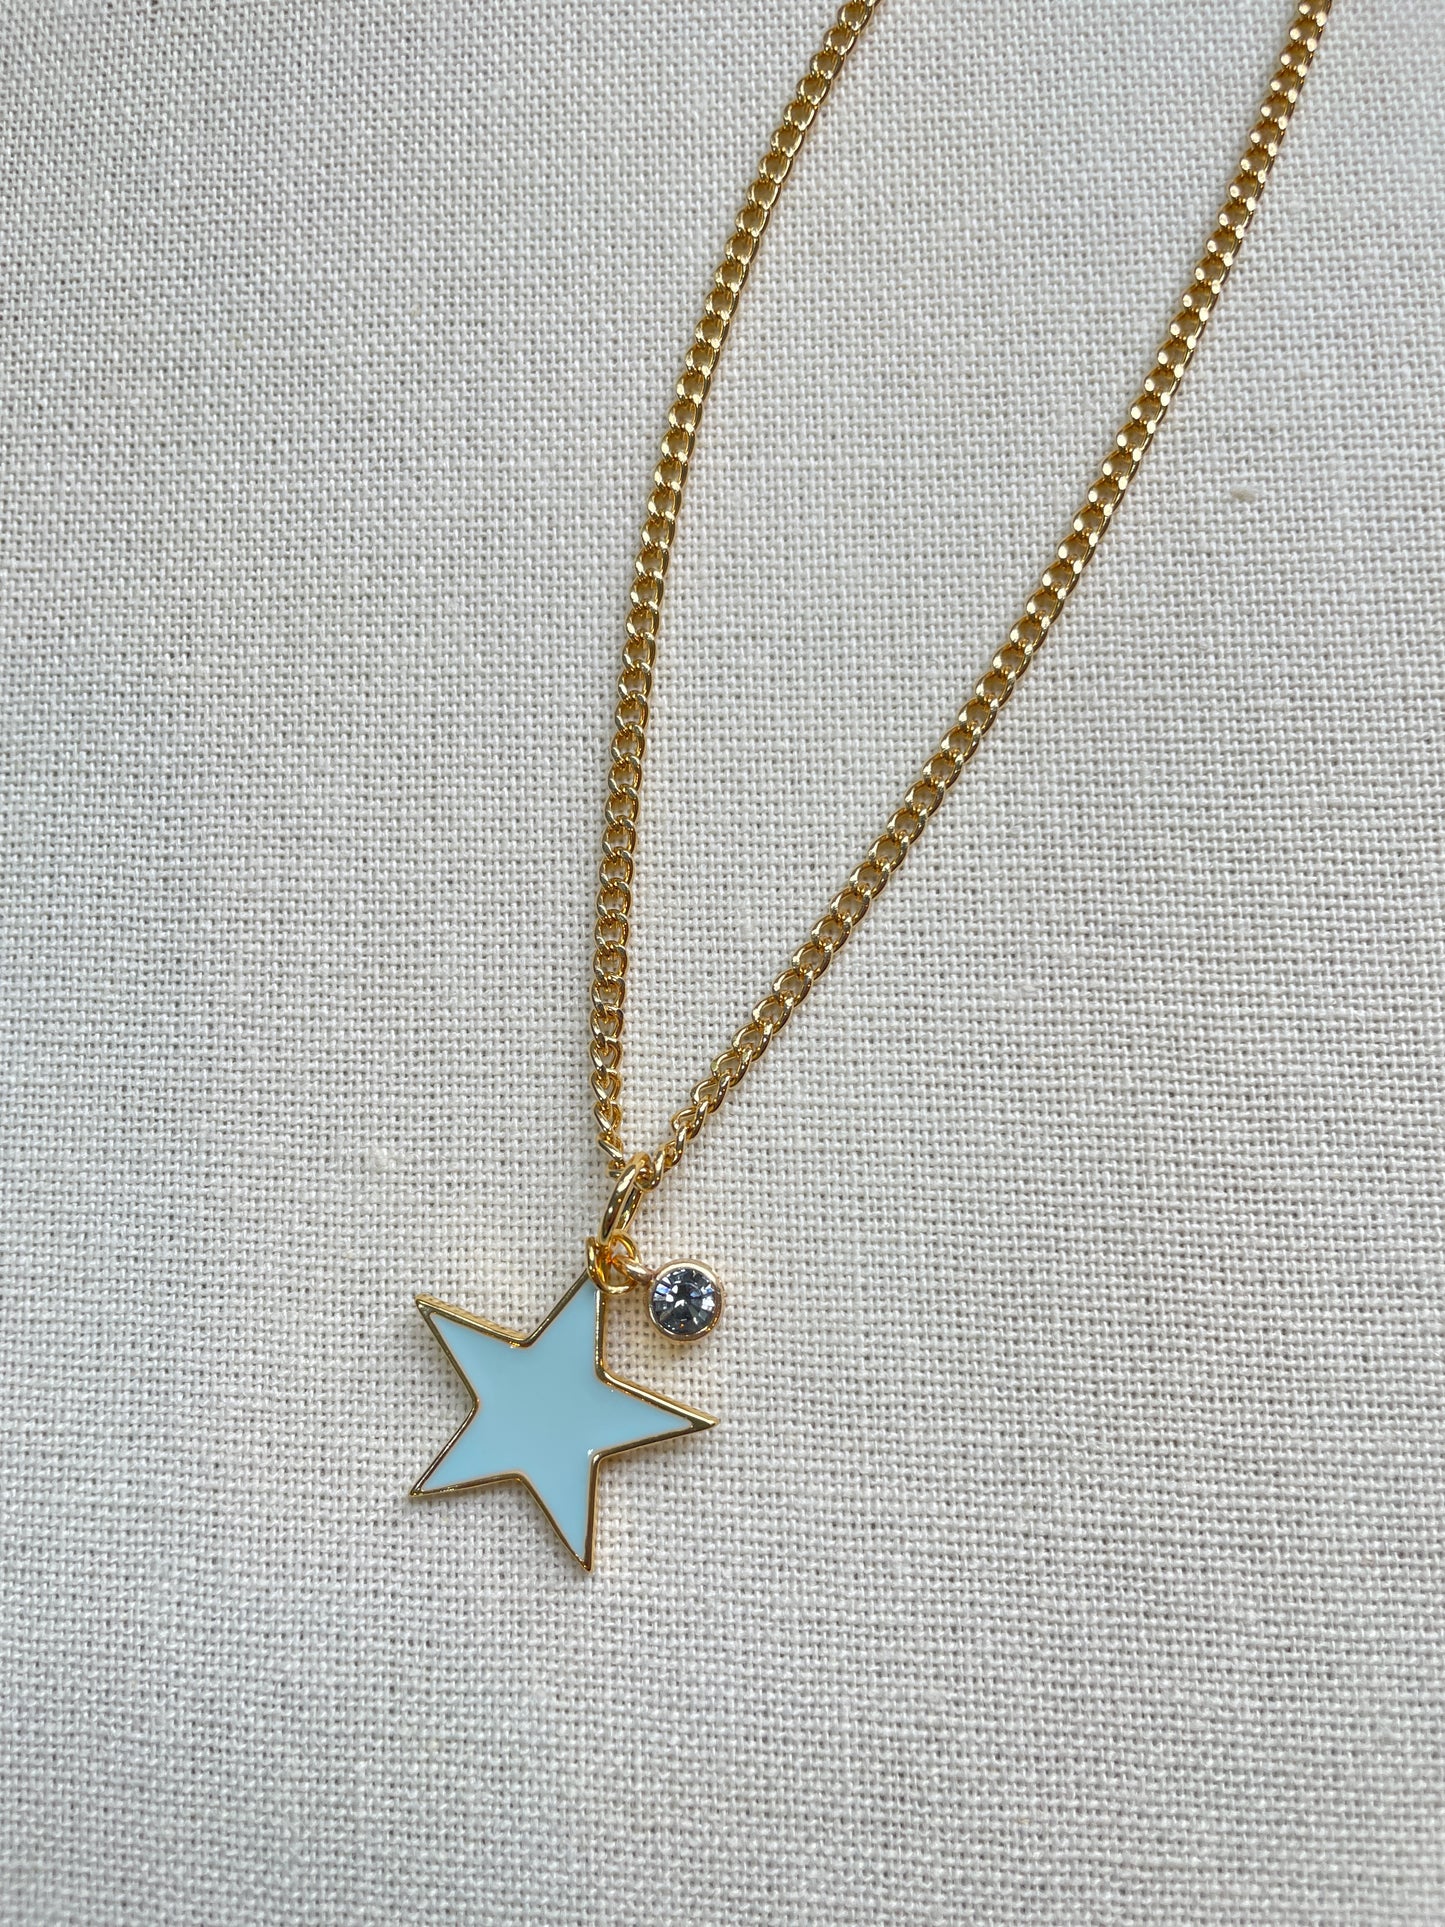 Large Blue Star Necklace